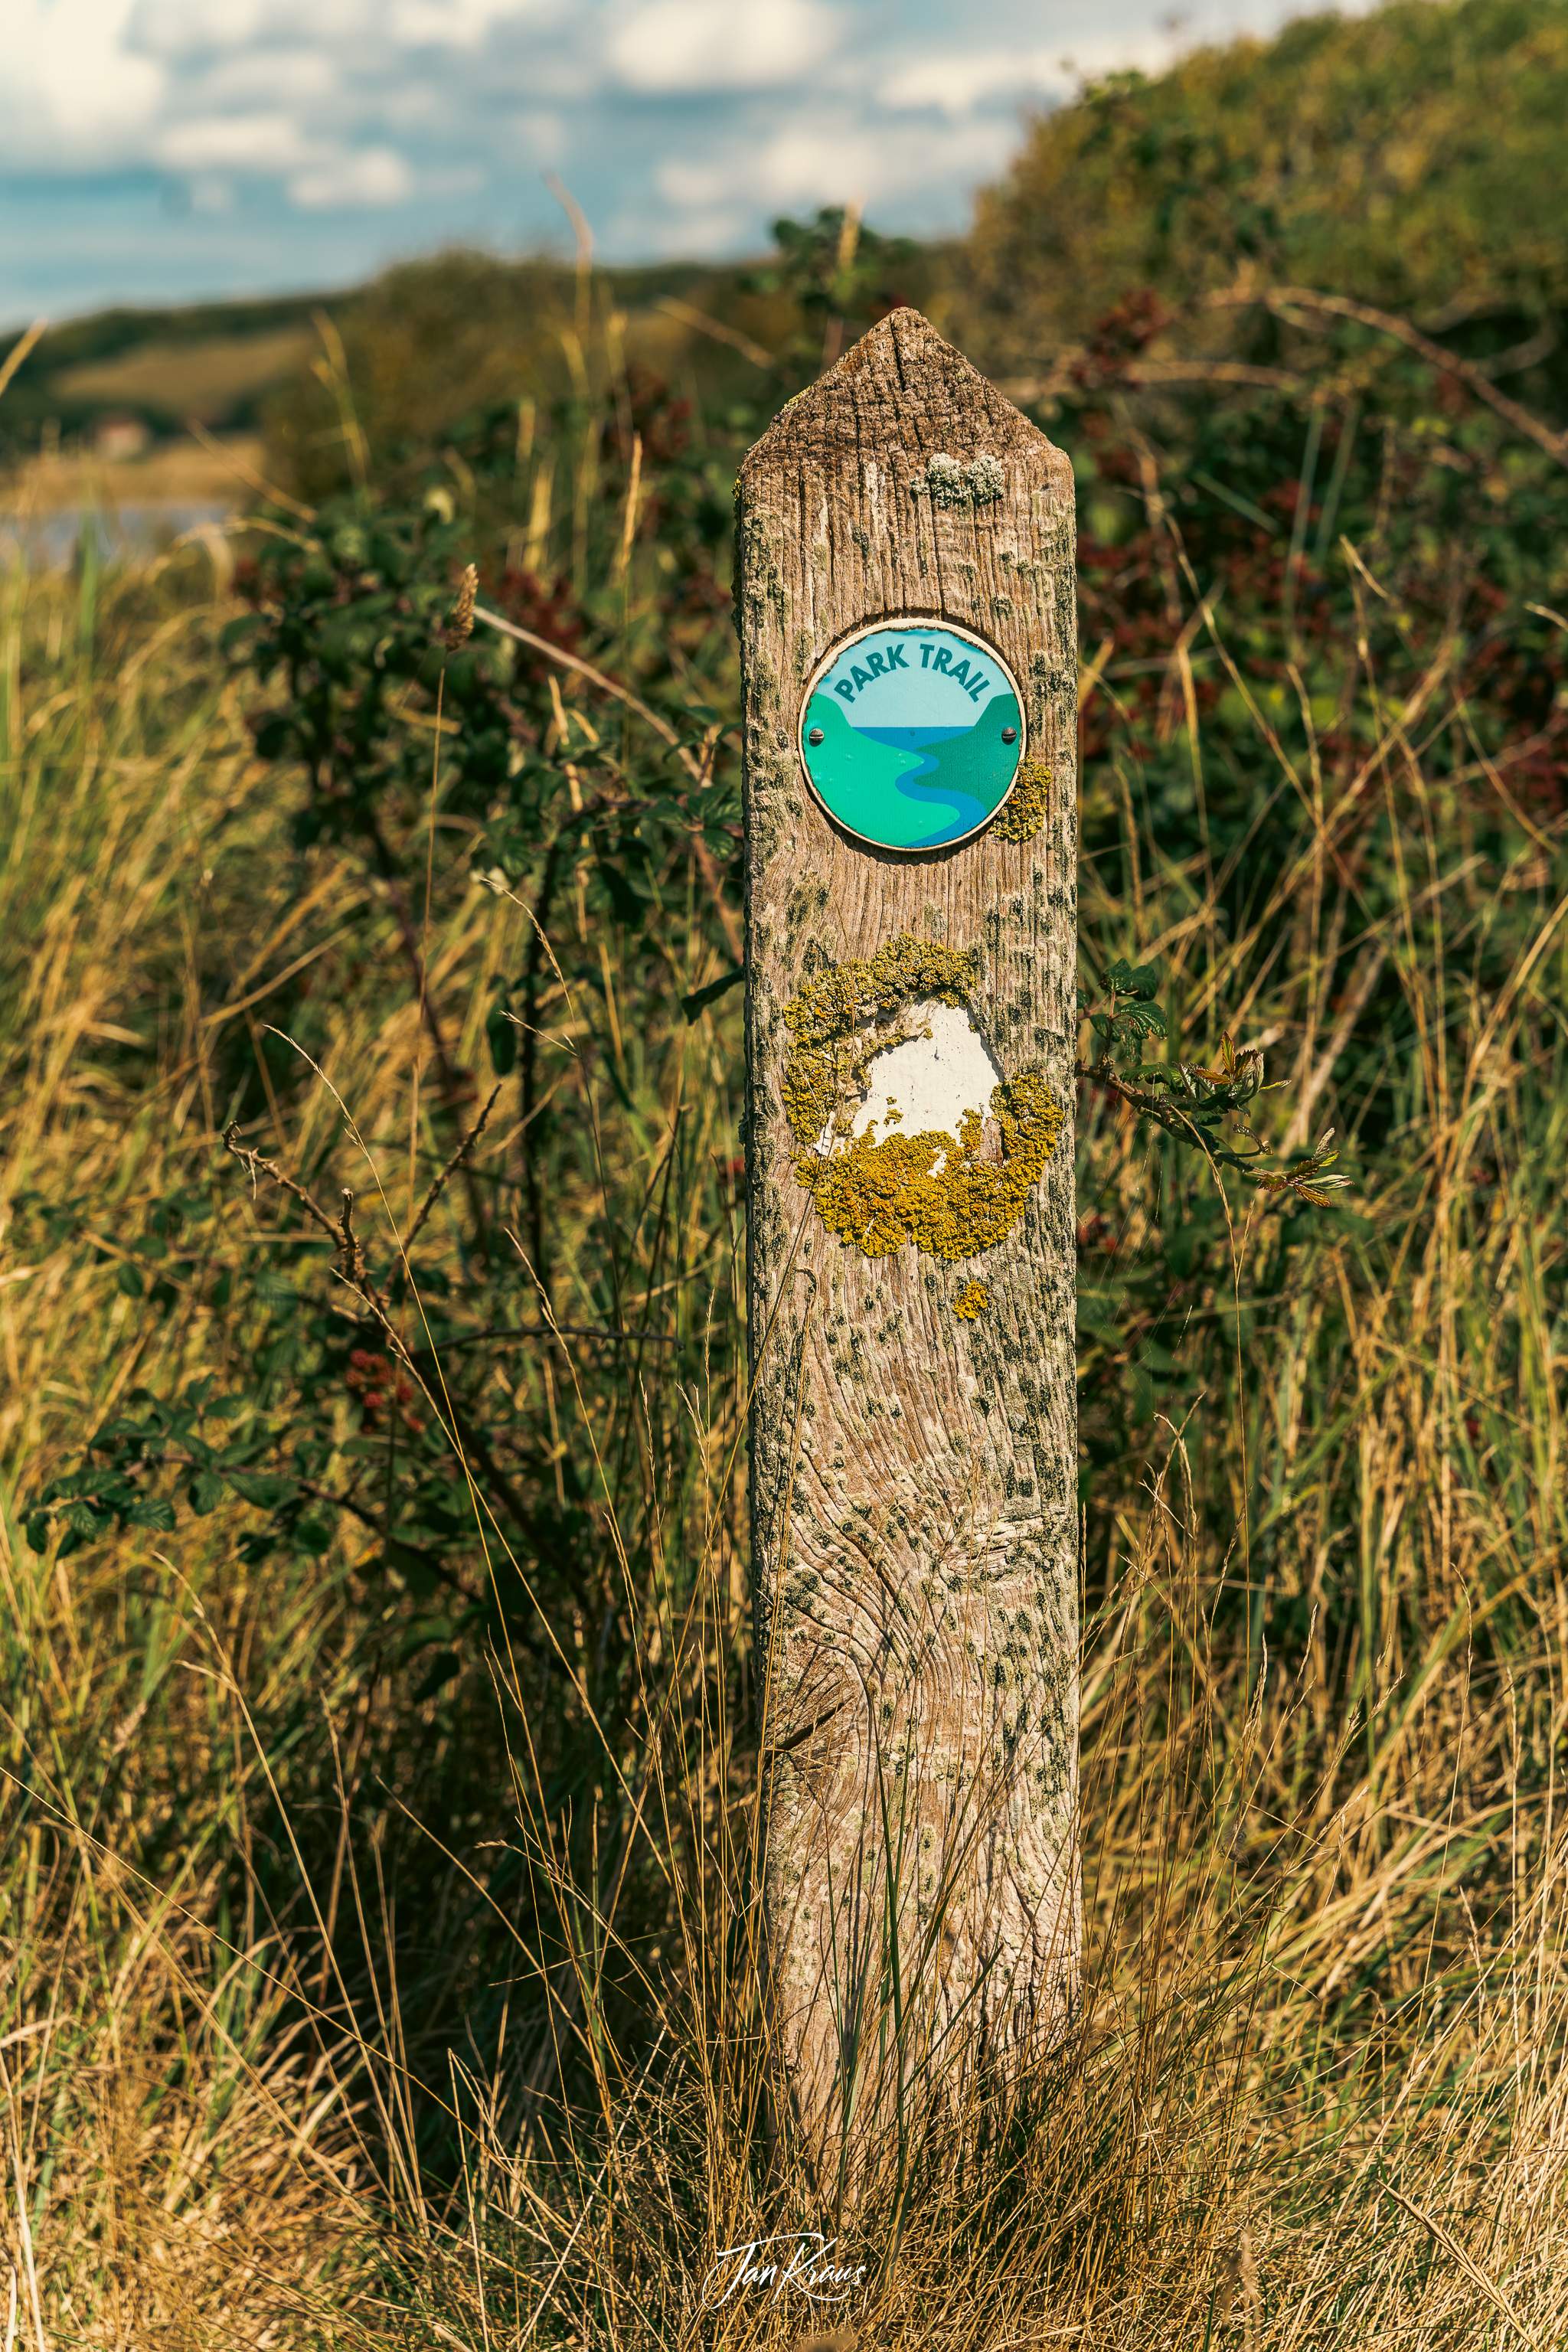 Another signpost at Cuckmere Haven path, East Sussex, England, UK